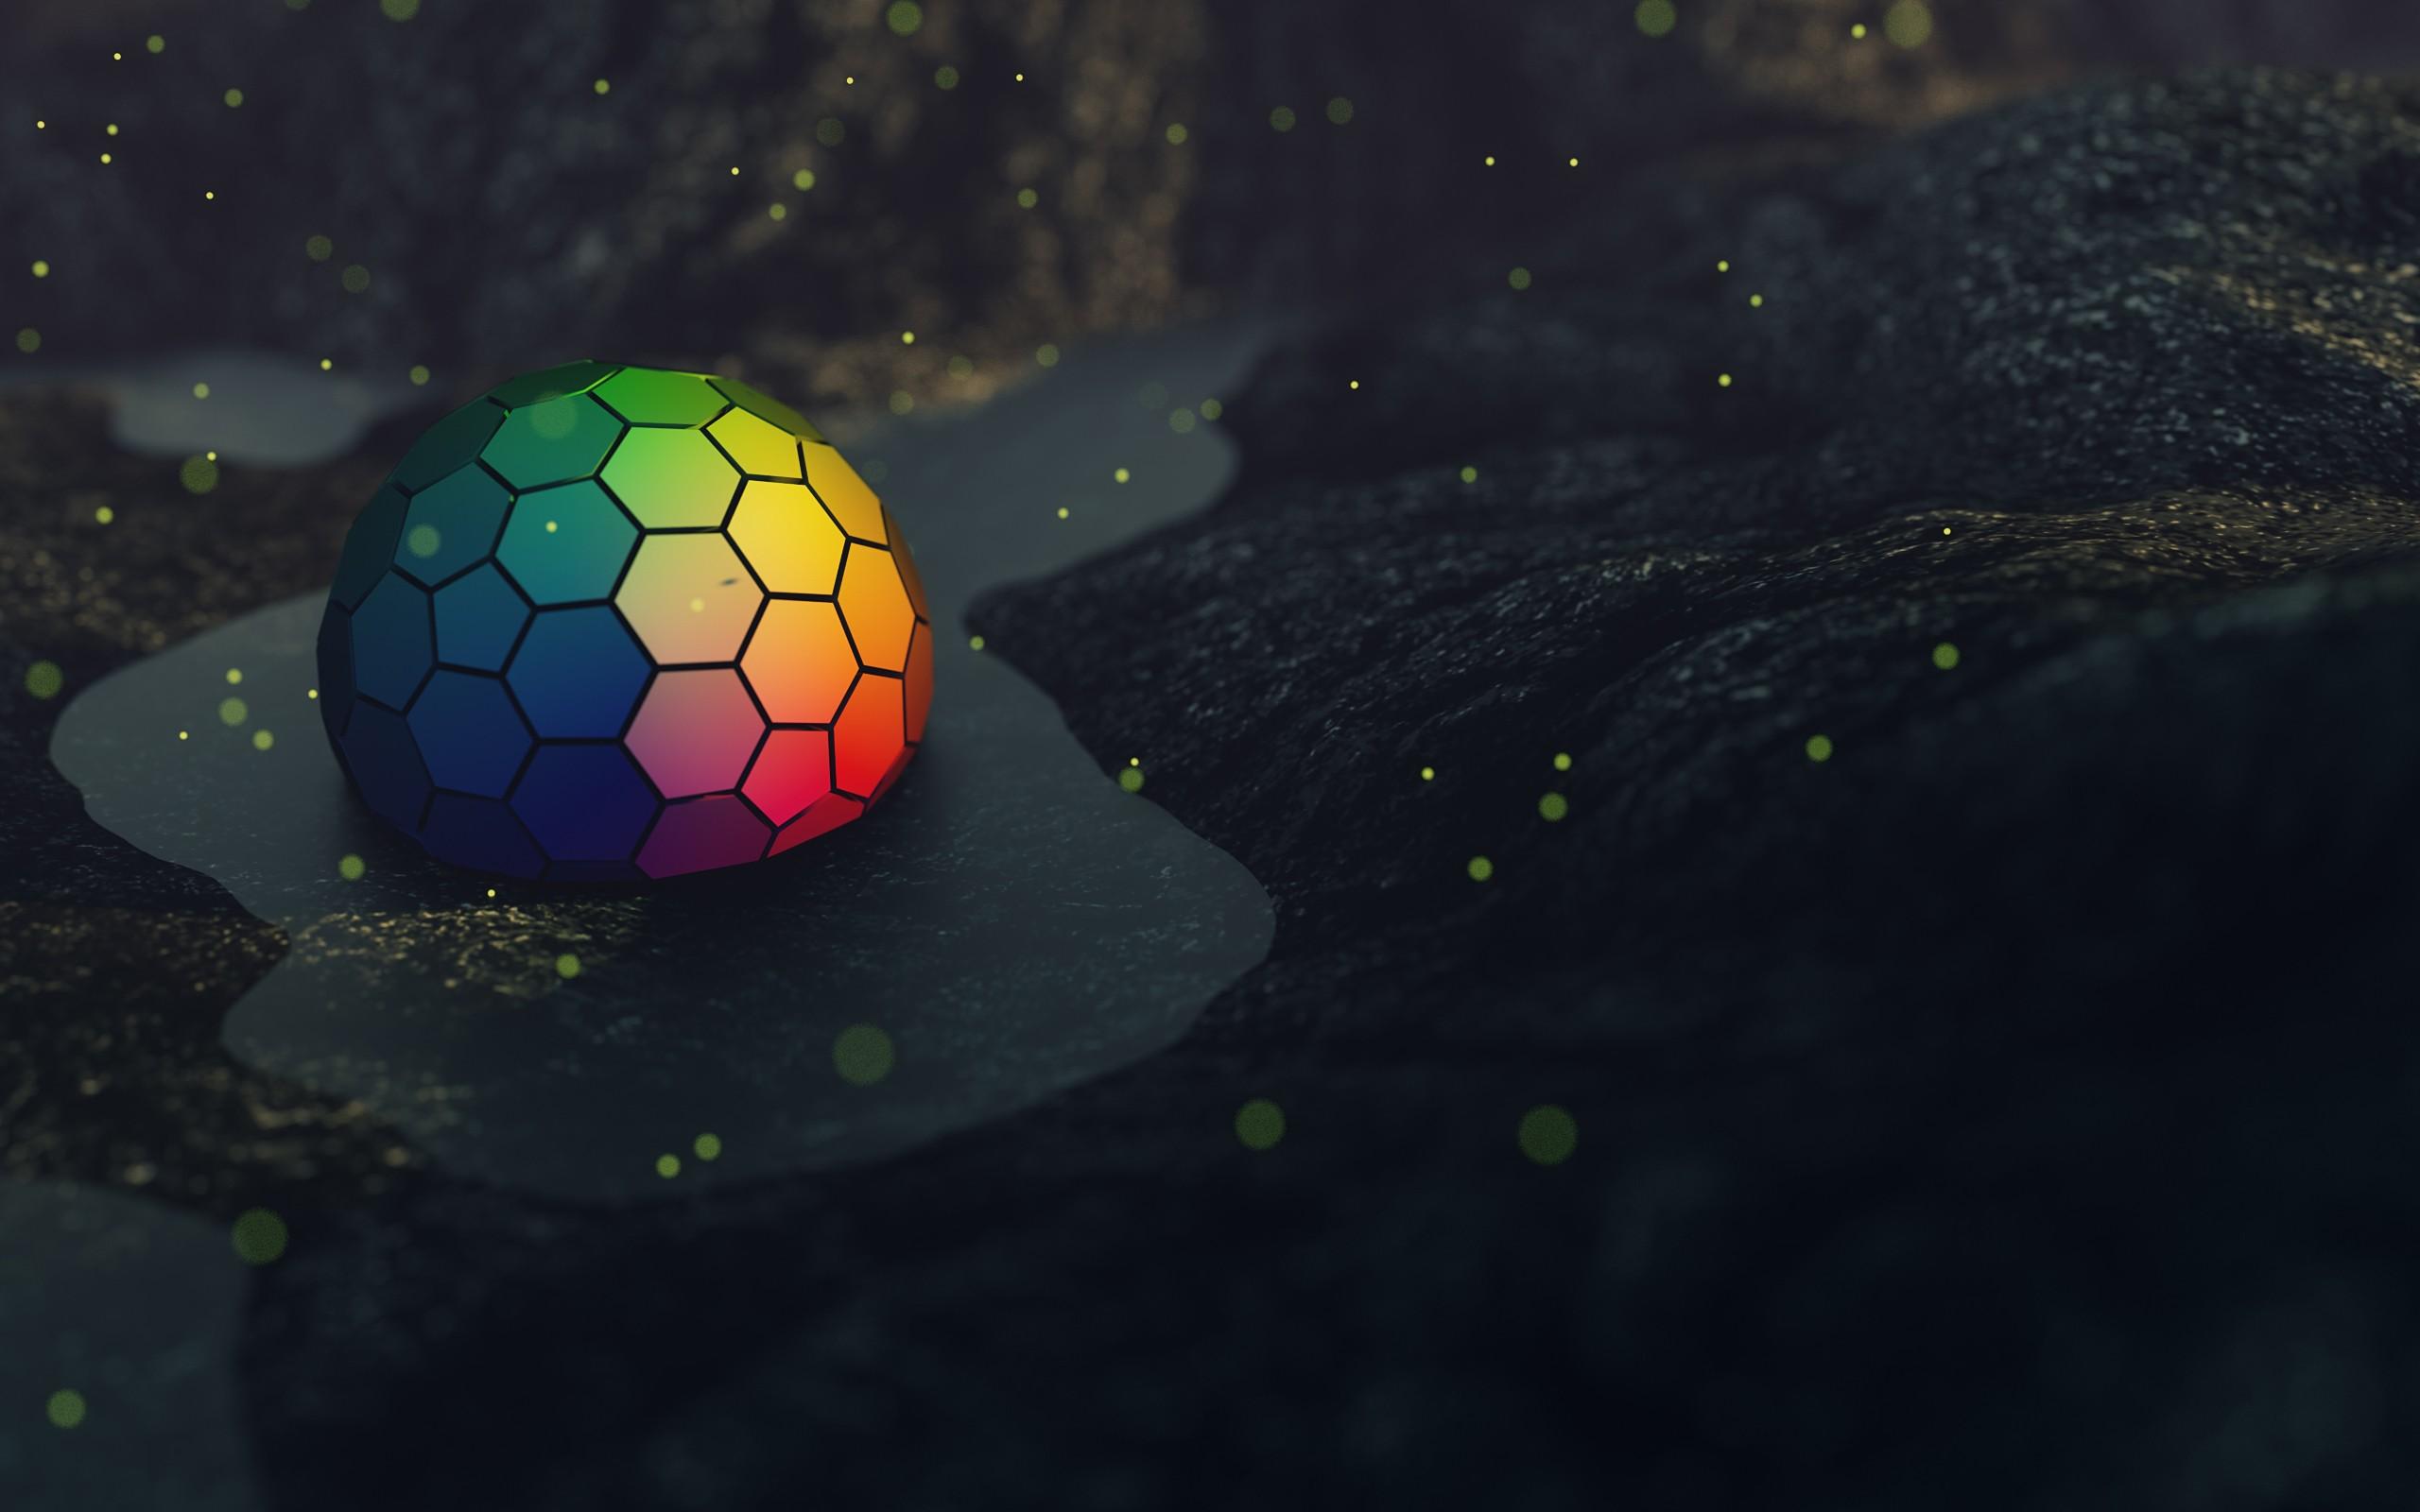 #sphere, D, d object, #colorful, #hexagon, #abstract